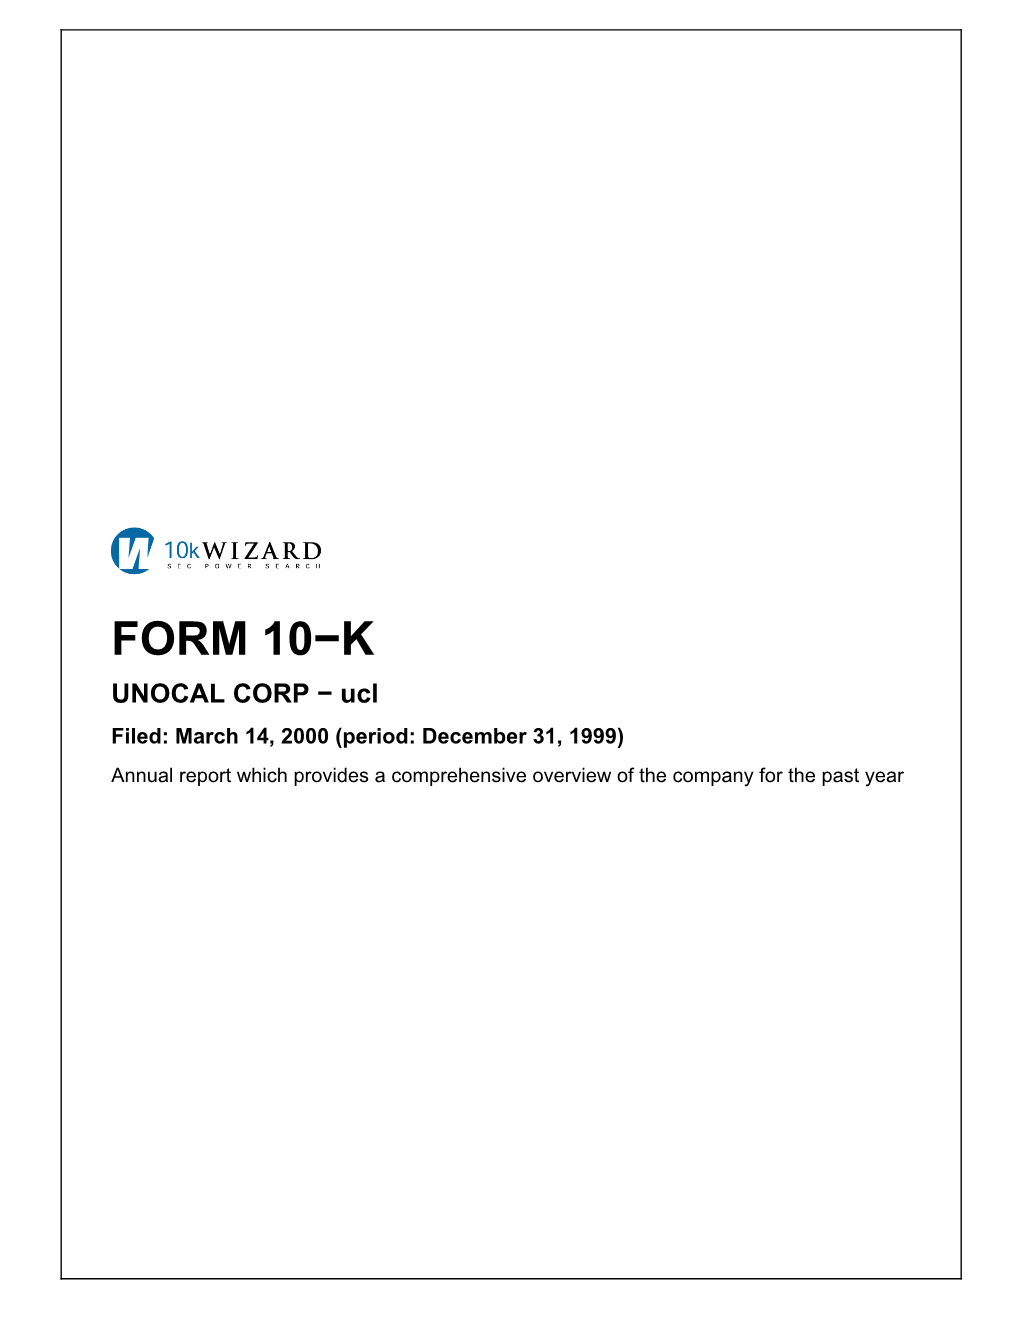 1999 Annual Report on Form 10-K